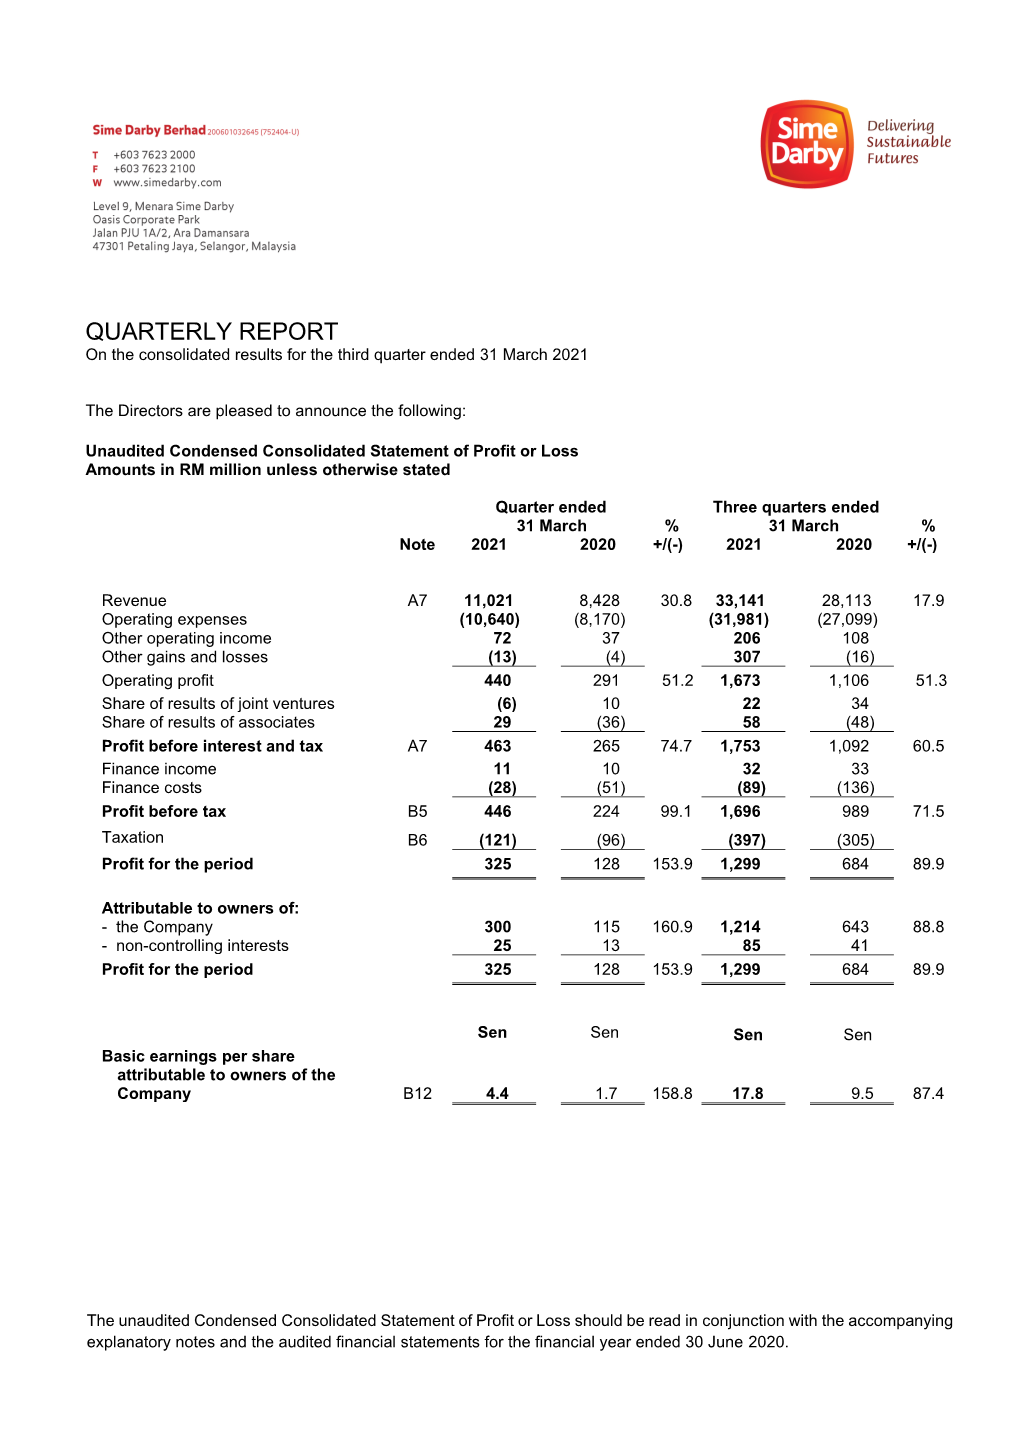 Unaudited Condensed Consolidated Balance Sheet